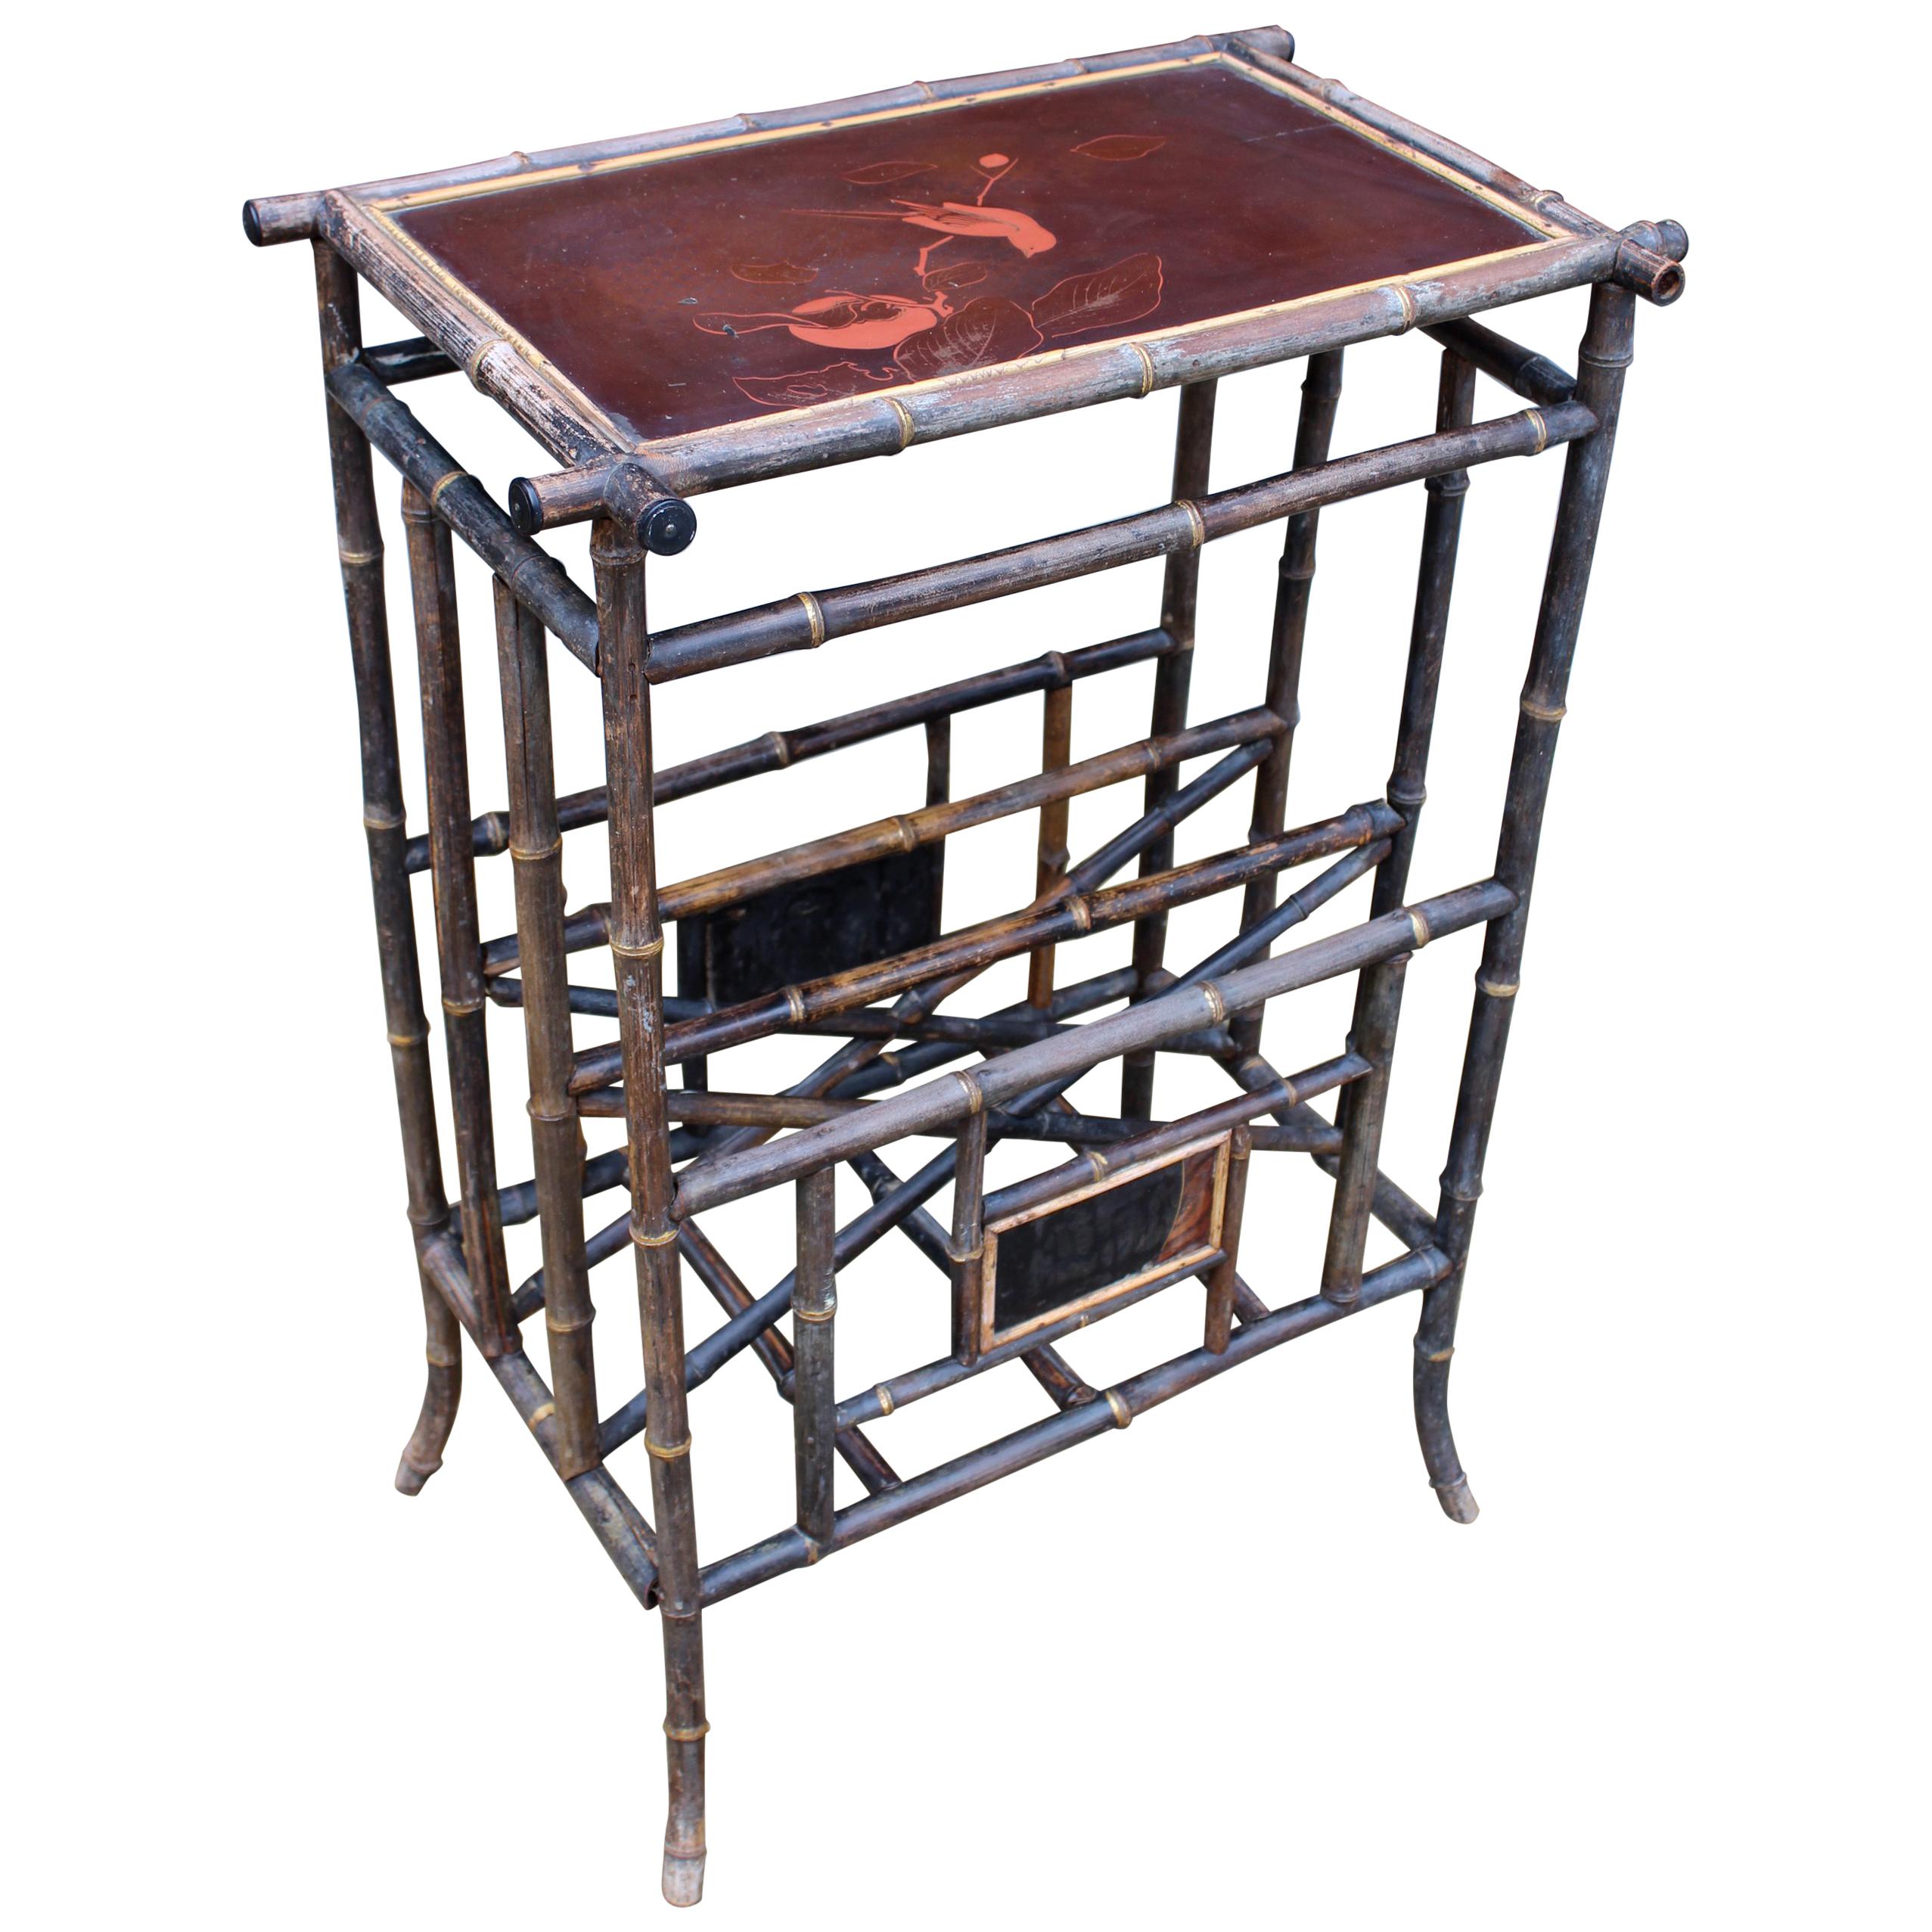 1950s Lacquer Decorated English Bamboo Side Table with Magazine Holder